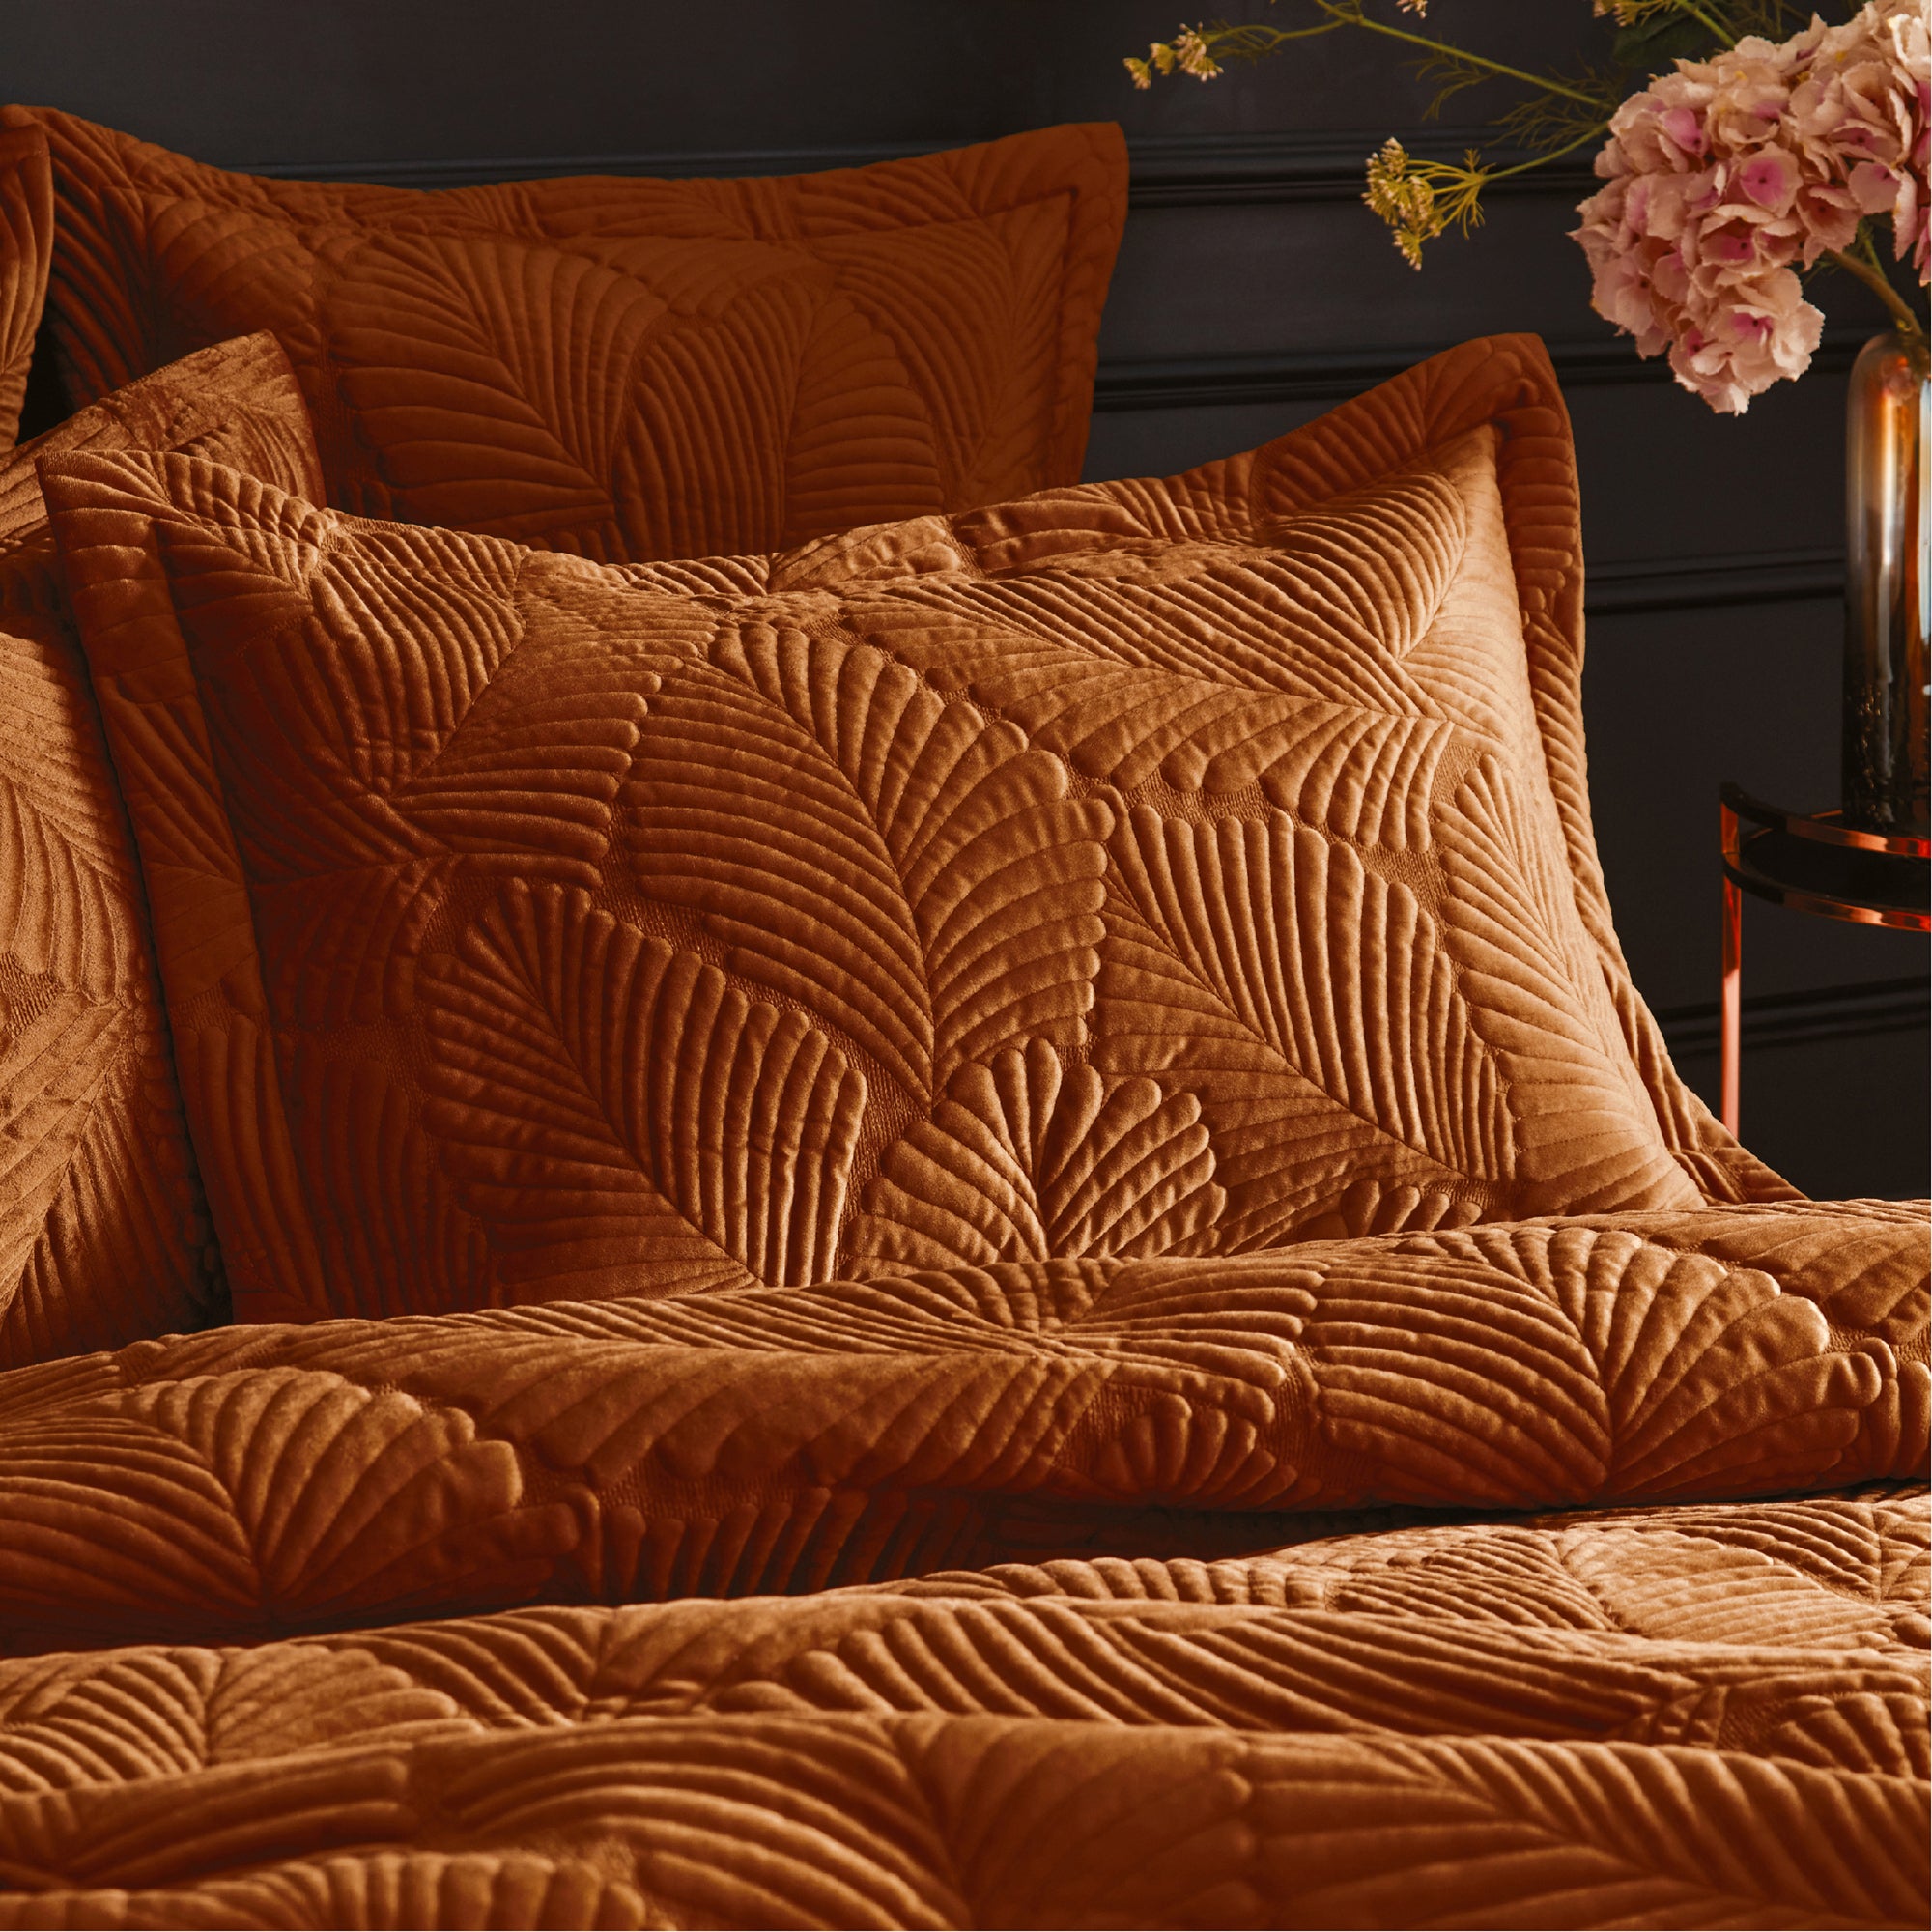 Paoletti Palmeria Rust Embroidered Reversible Duvet Cover and Pillowcase Set